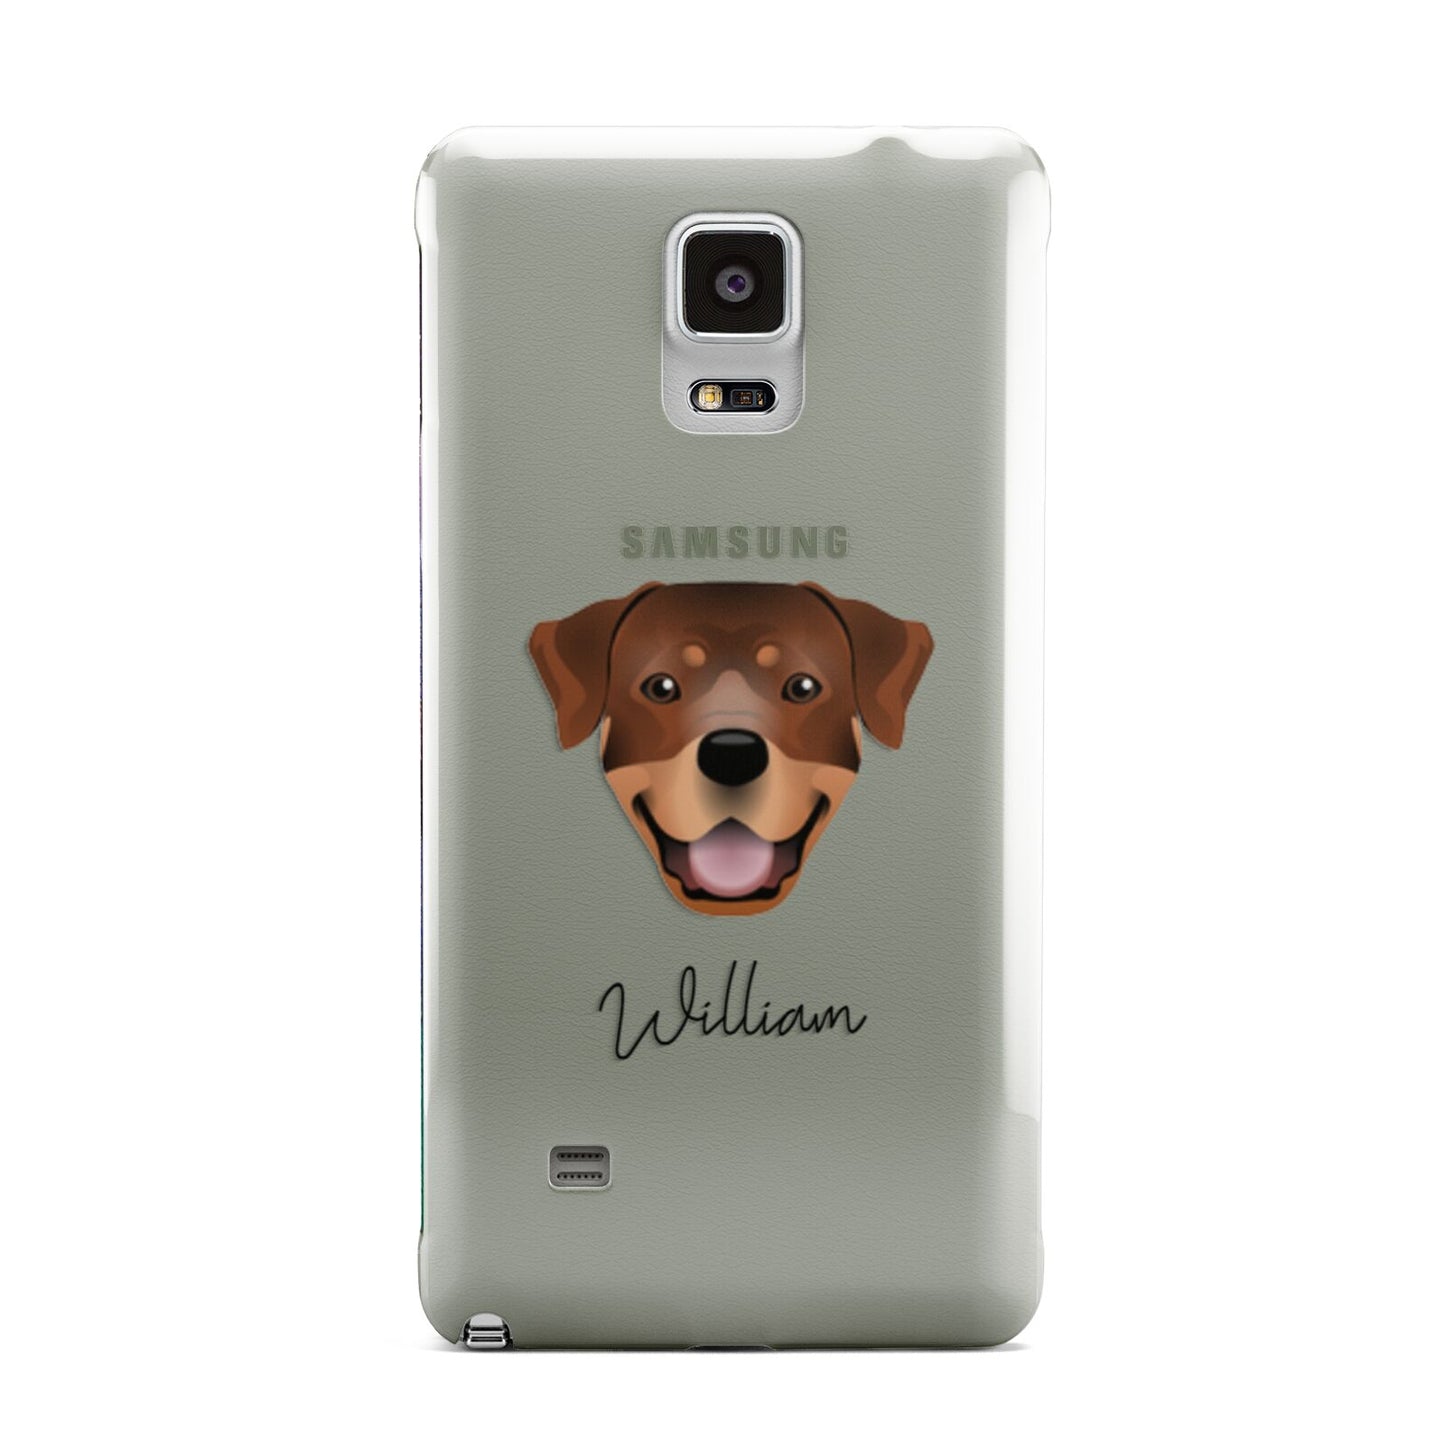 Rottweiler Personalised Samsung Galaxy Note 4 Case